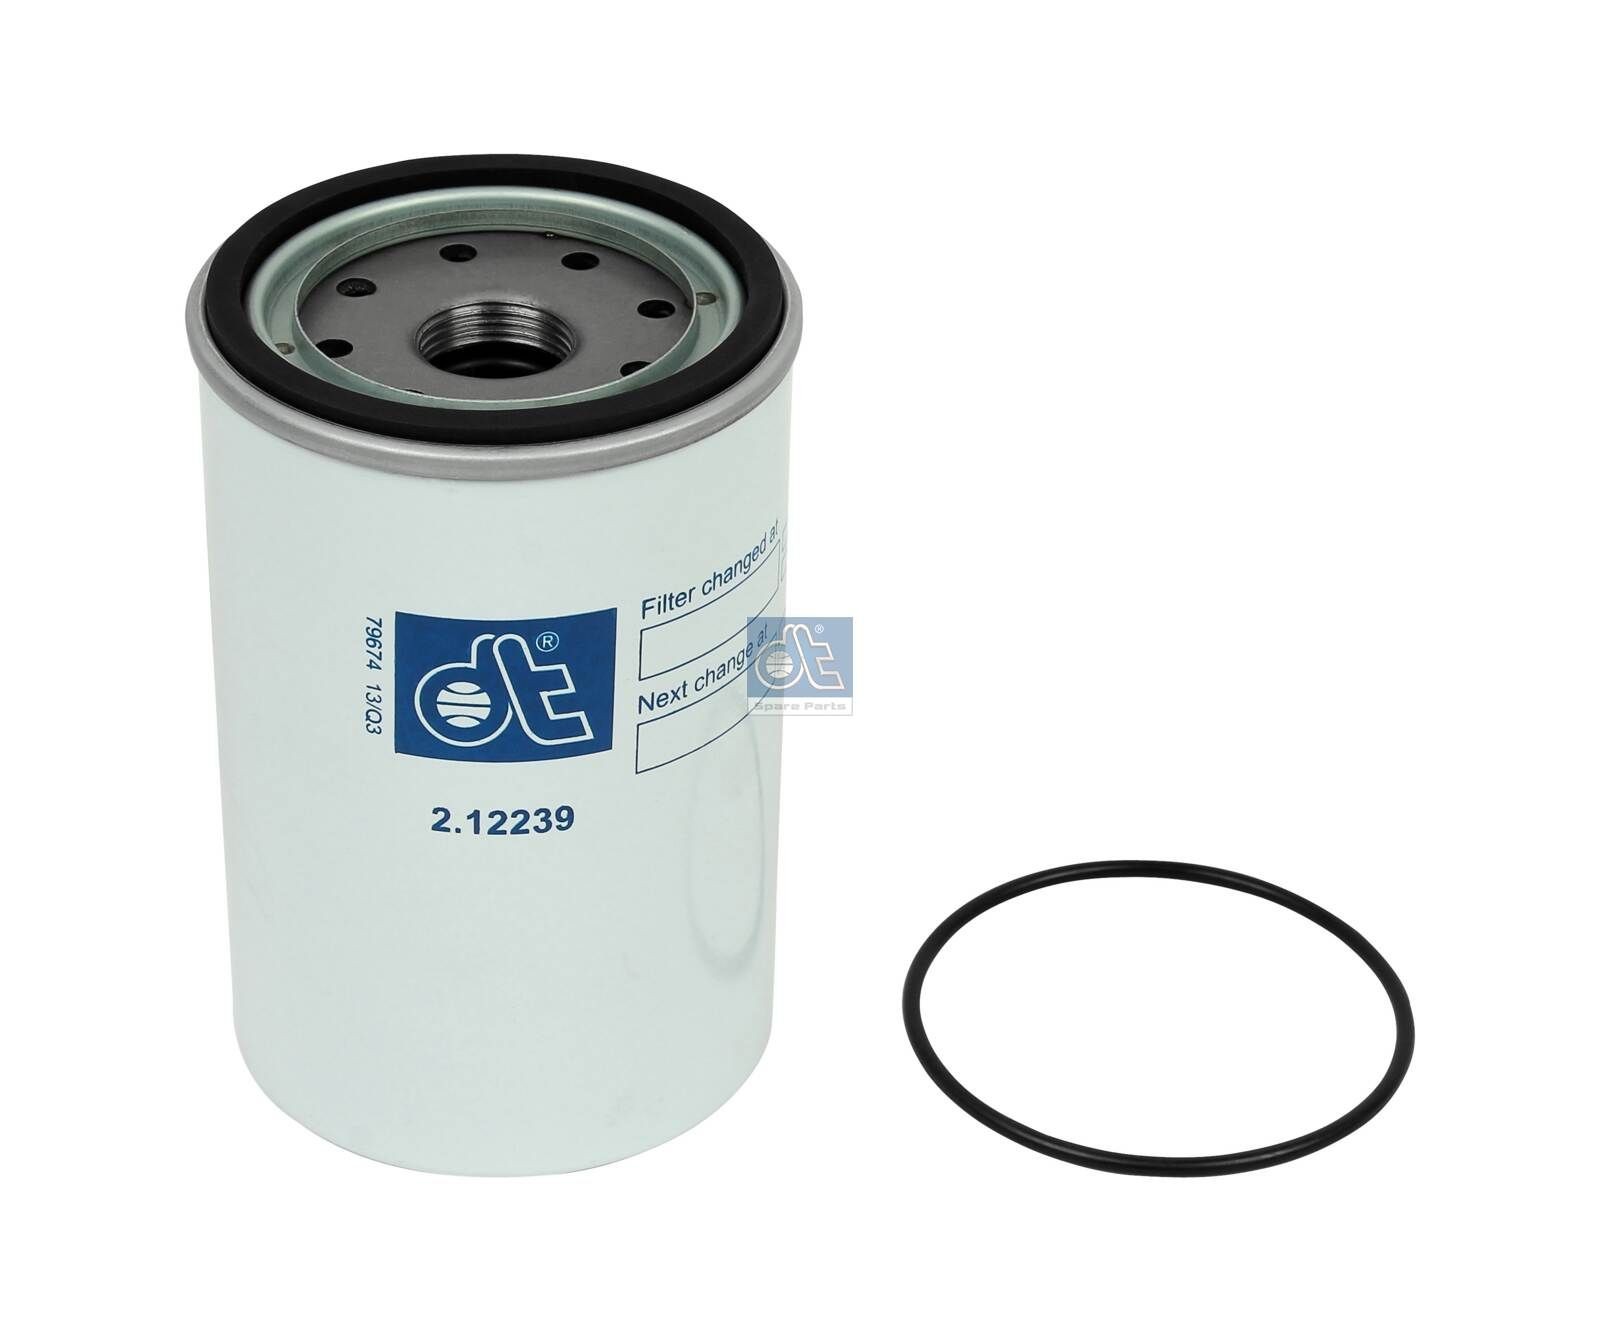 DT Spare Parts 2.12239 Fuel filter cheap in online store